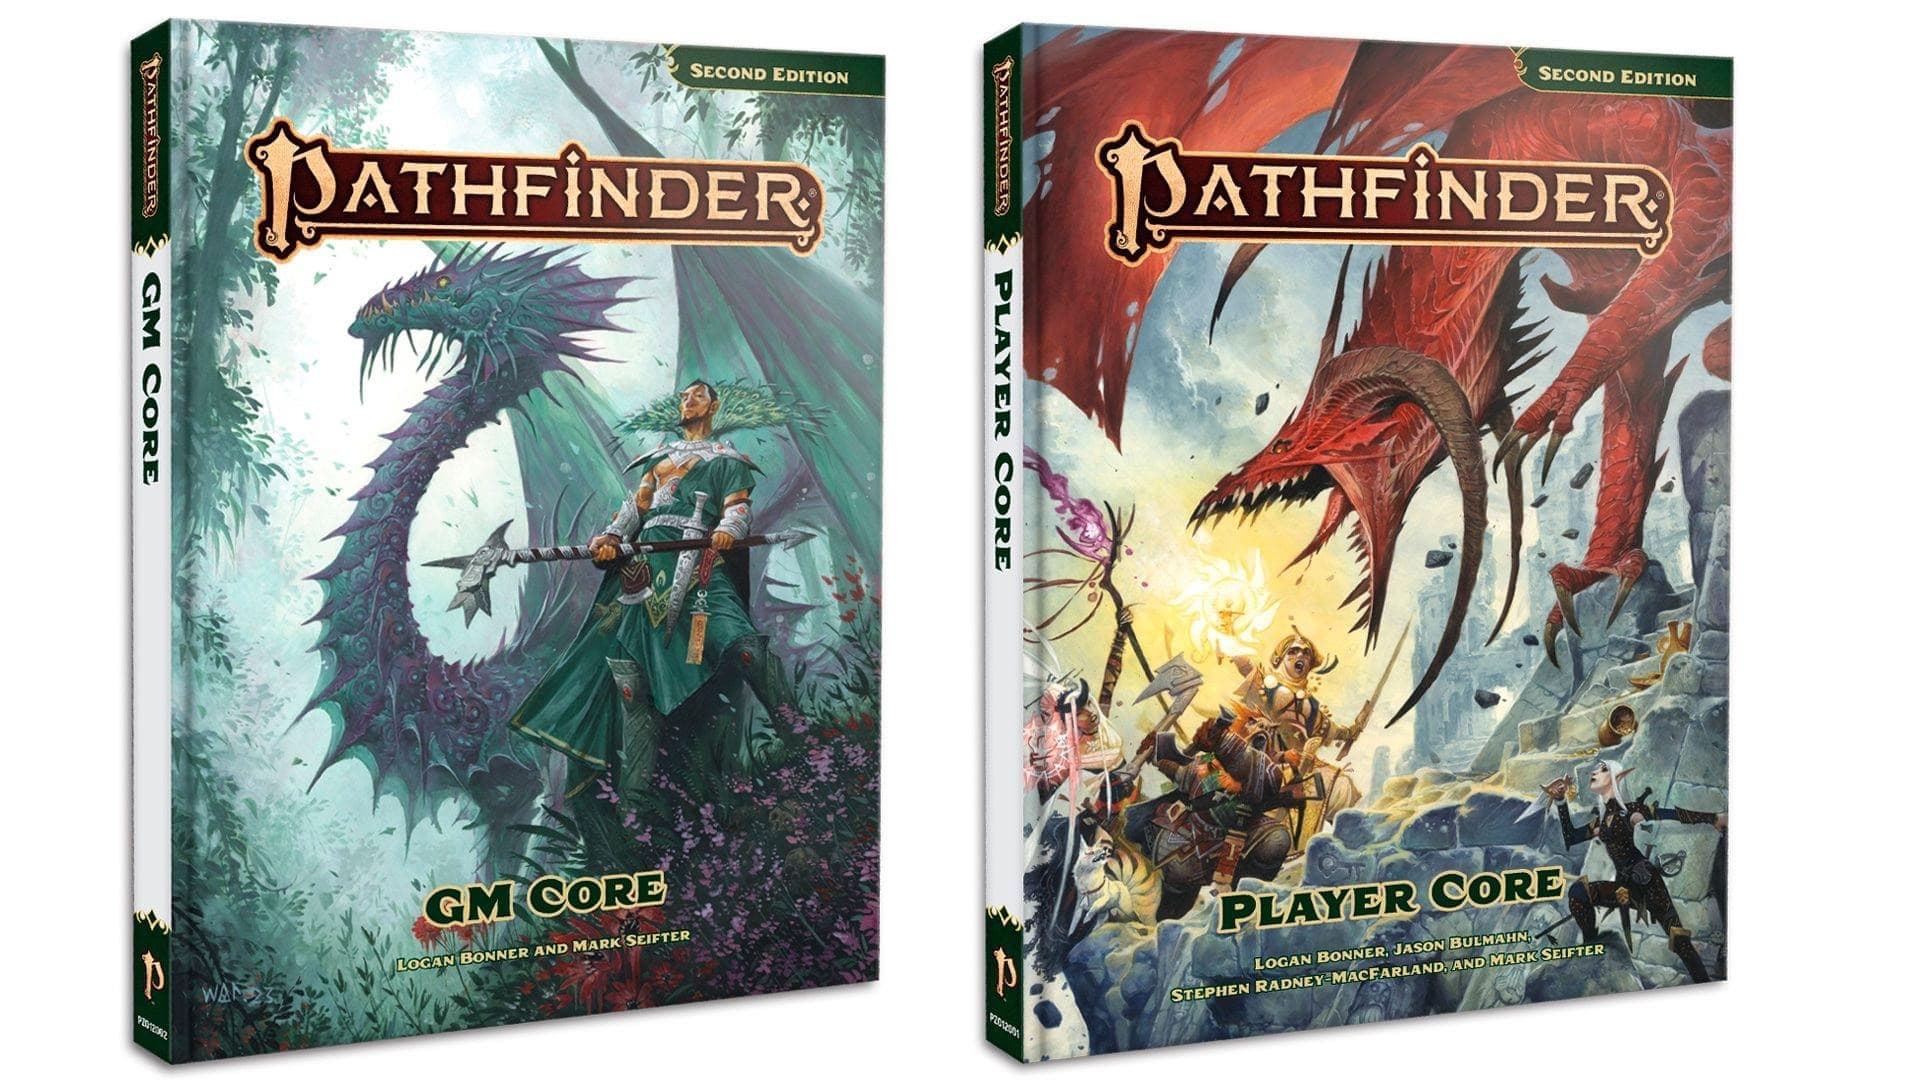 Pathfinder 2e - Remaster GM Core - Special Edition - Au Royaume